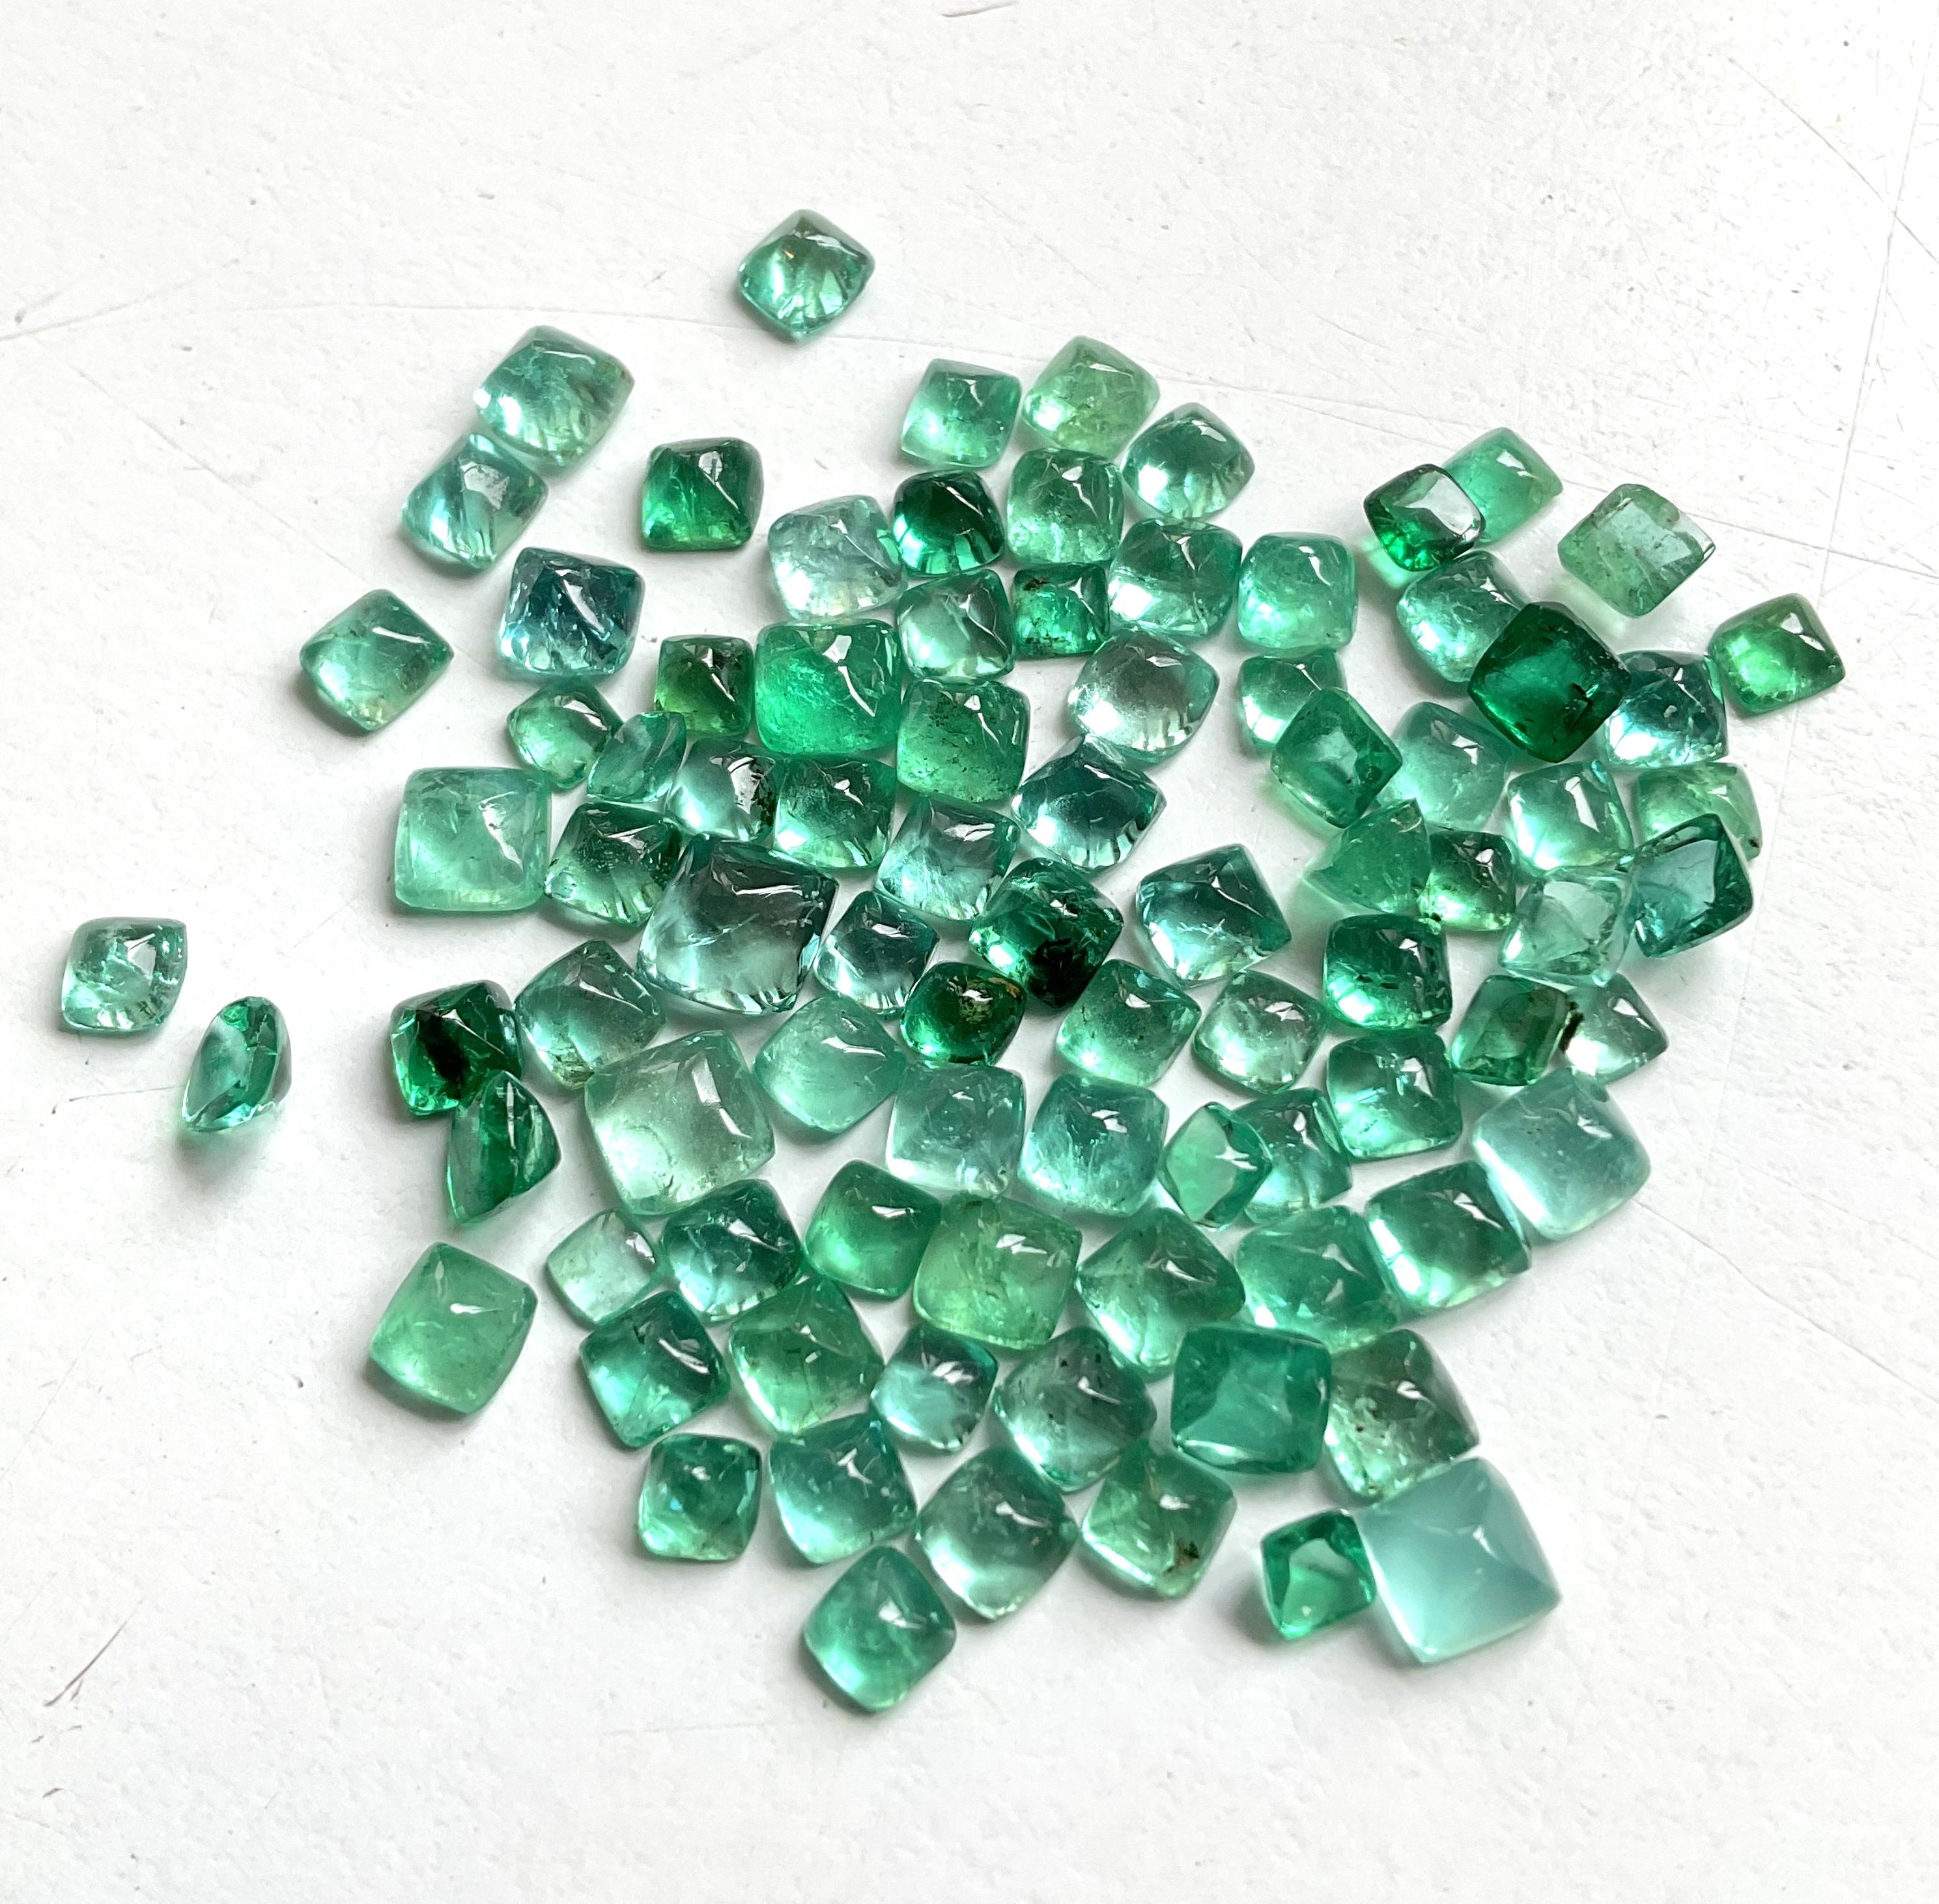 27.19 Carats Zambian Emerald Sugarloaf Cabochon For Fine Jewelry Natural Gem For Sale 1